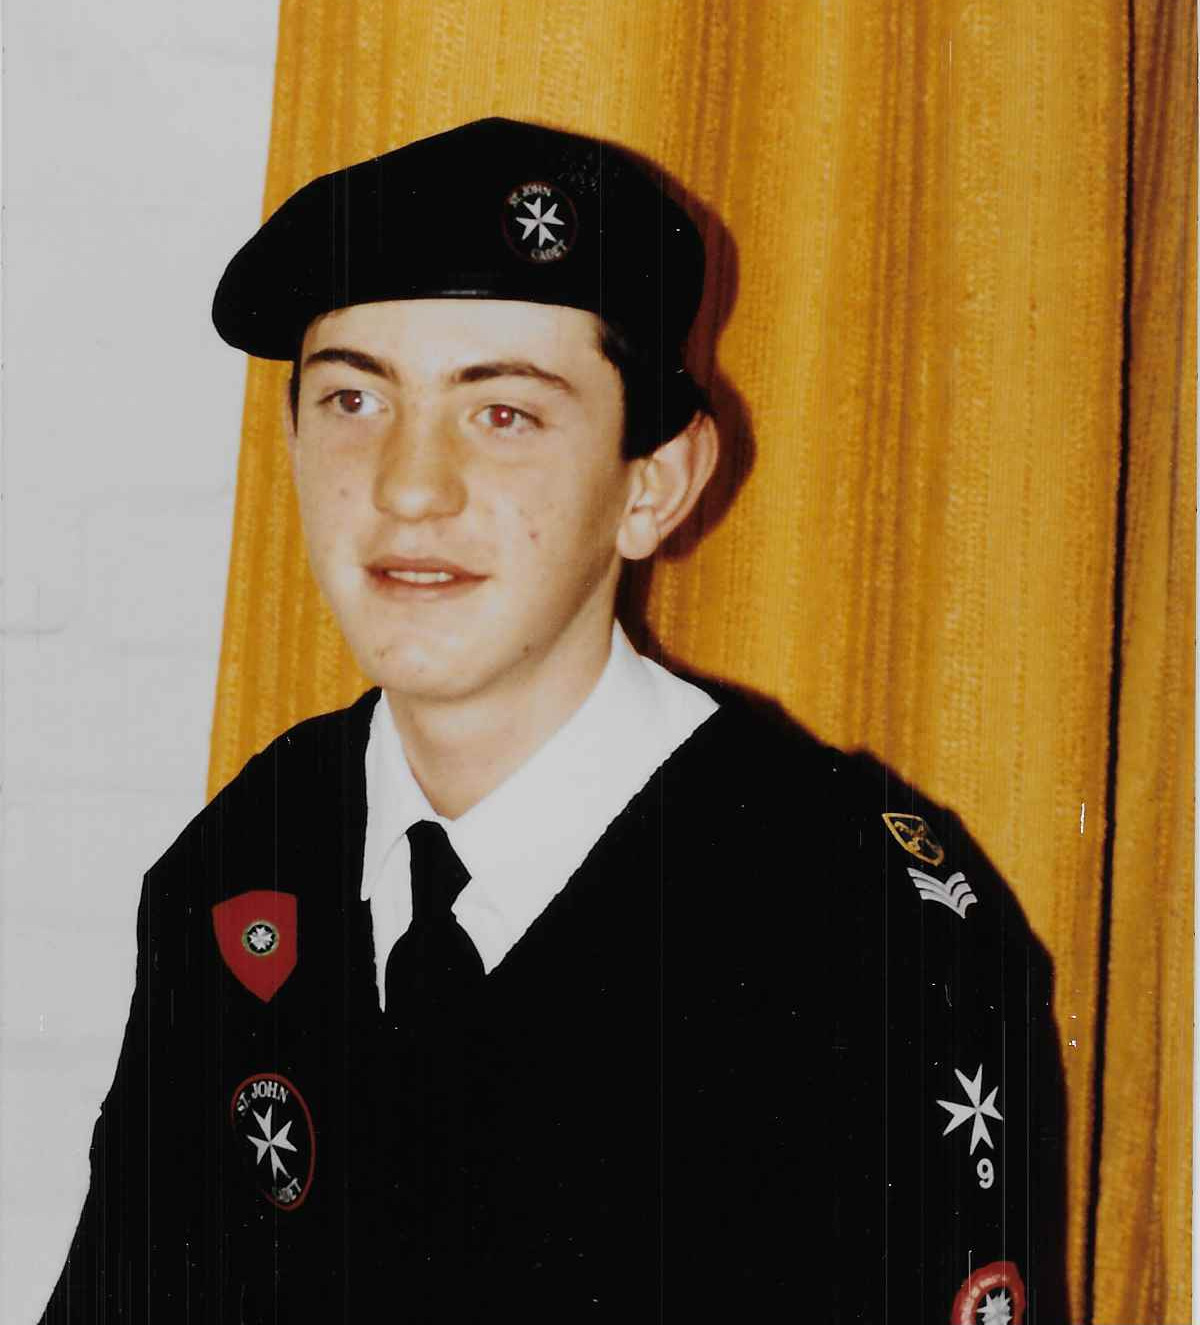 Colour photograph showing a young male Cadet in uniform. He is smiling and looking slightly off camera. He wears a white shirt